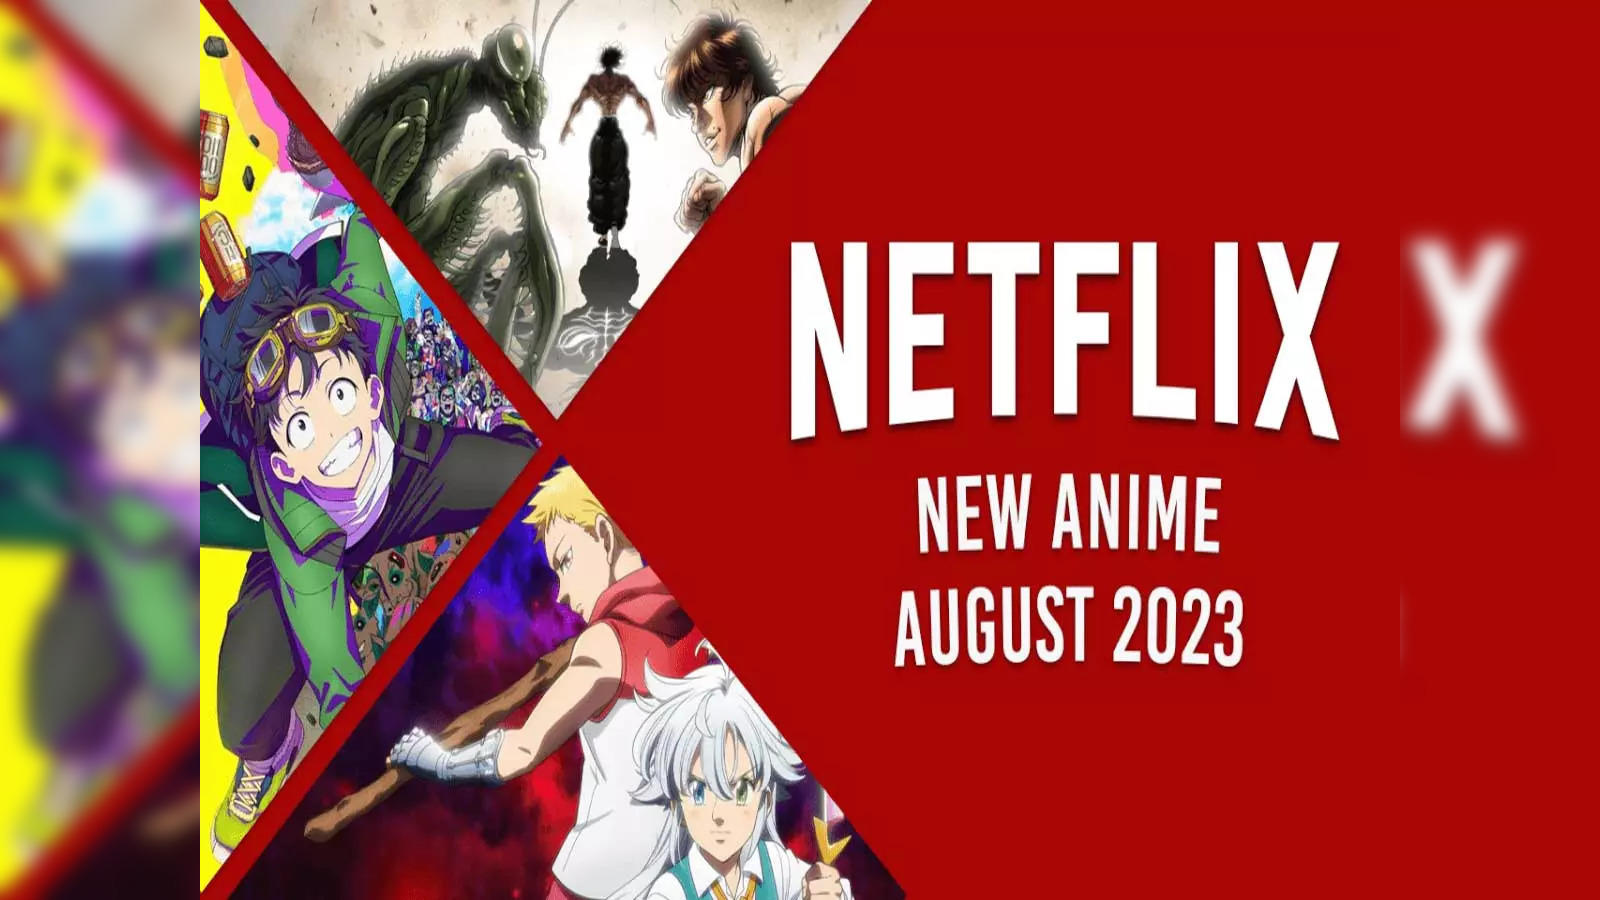 3 new Japanese anime titles coming to Netflix in October 2023